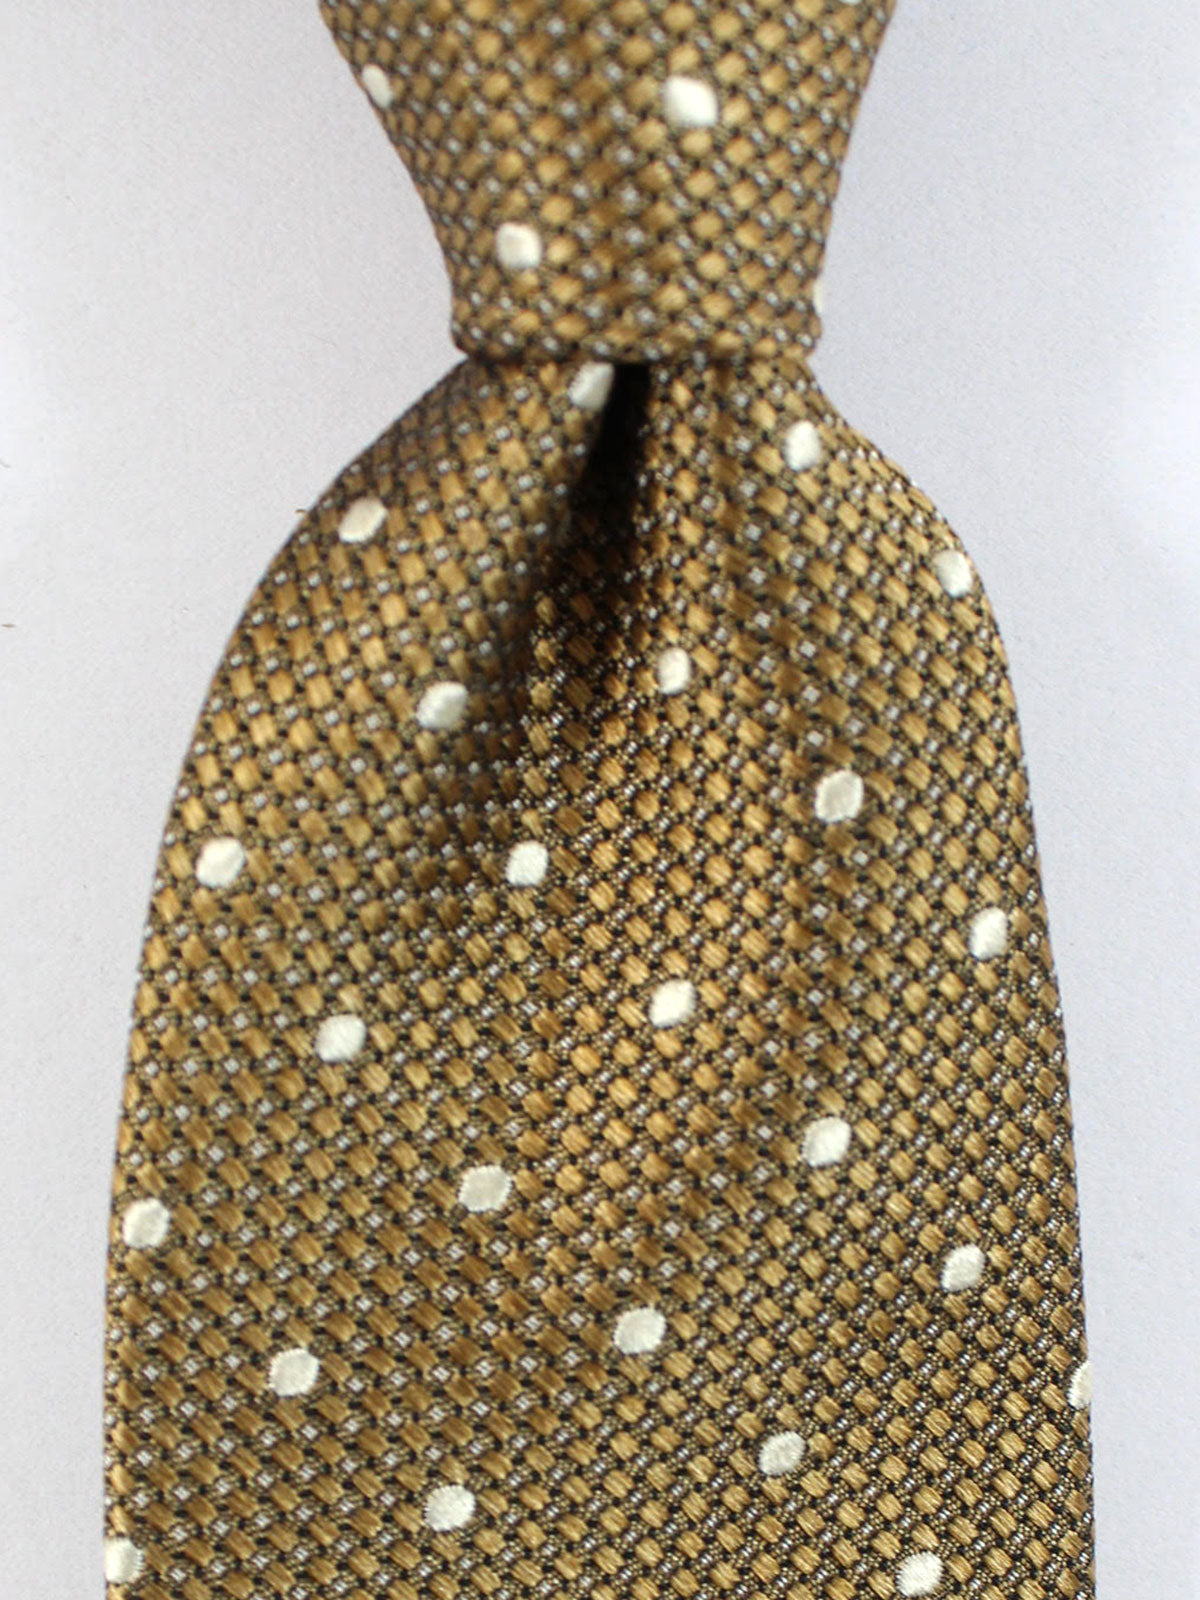 Tom Ford Tie Olive Silver Dots